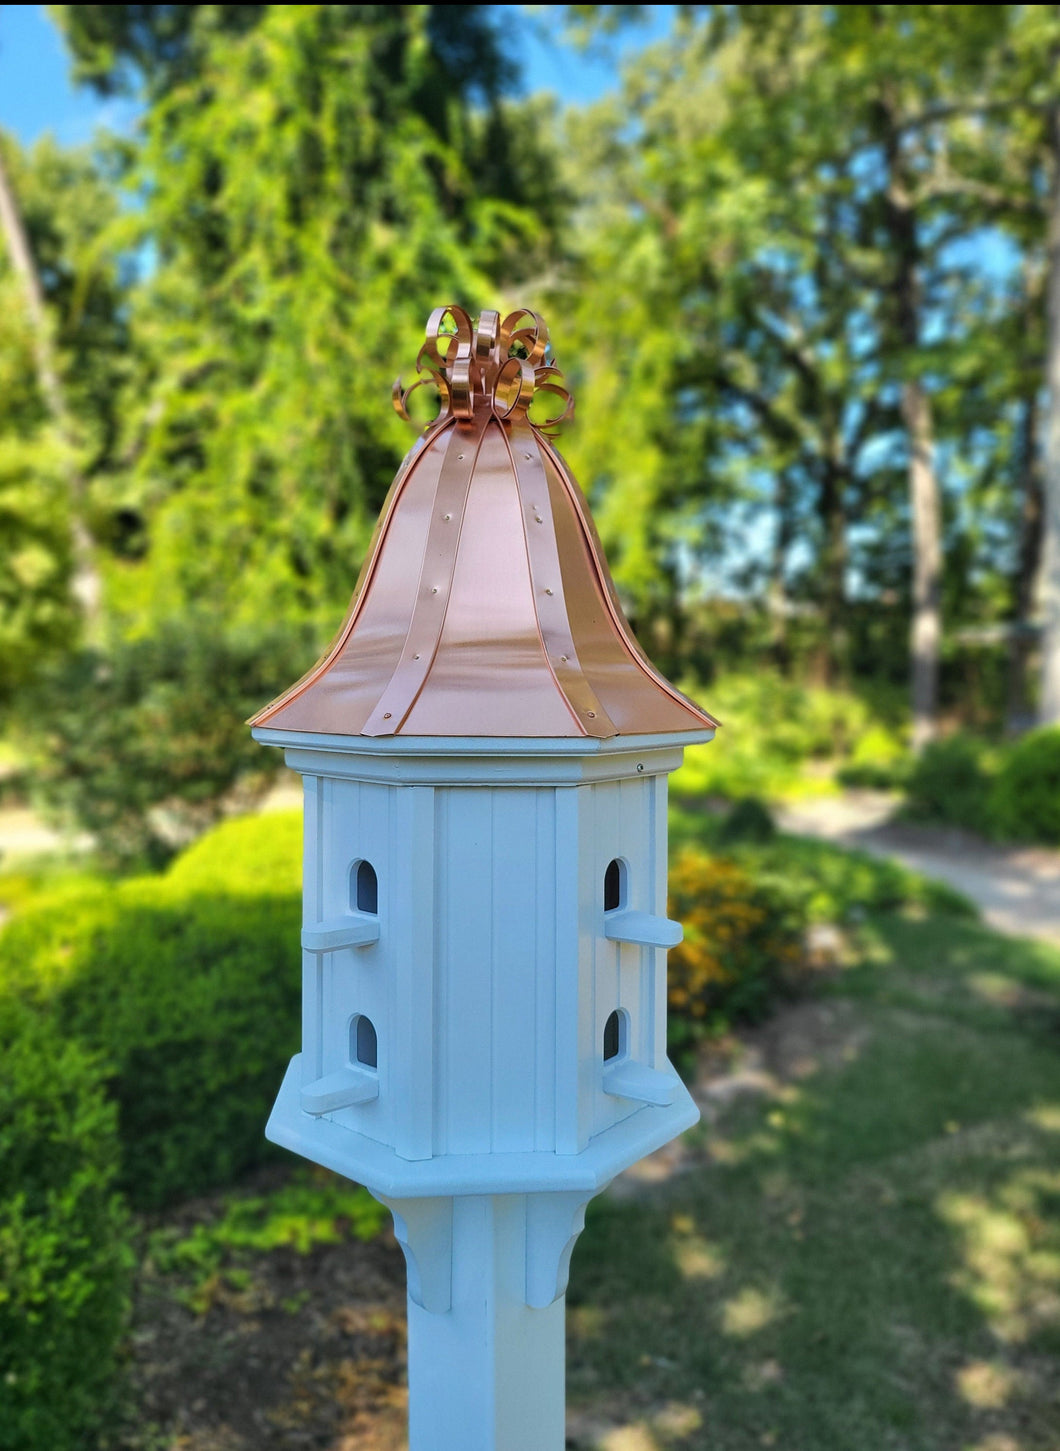 Bell Copper Roof Bird House With Curly Copper Design, 8 Nesting Compartments, Extra Large Weather Resistant Birdhouse